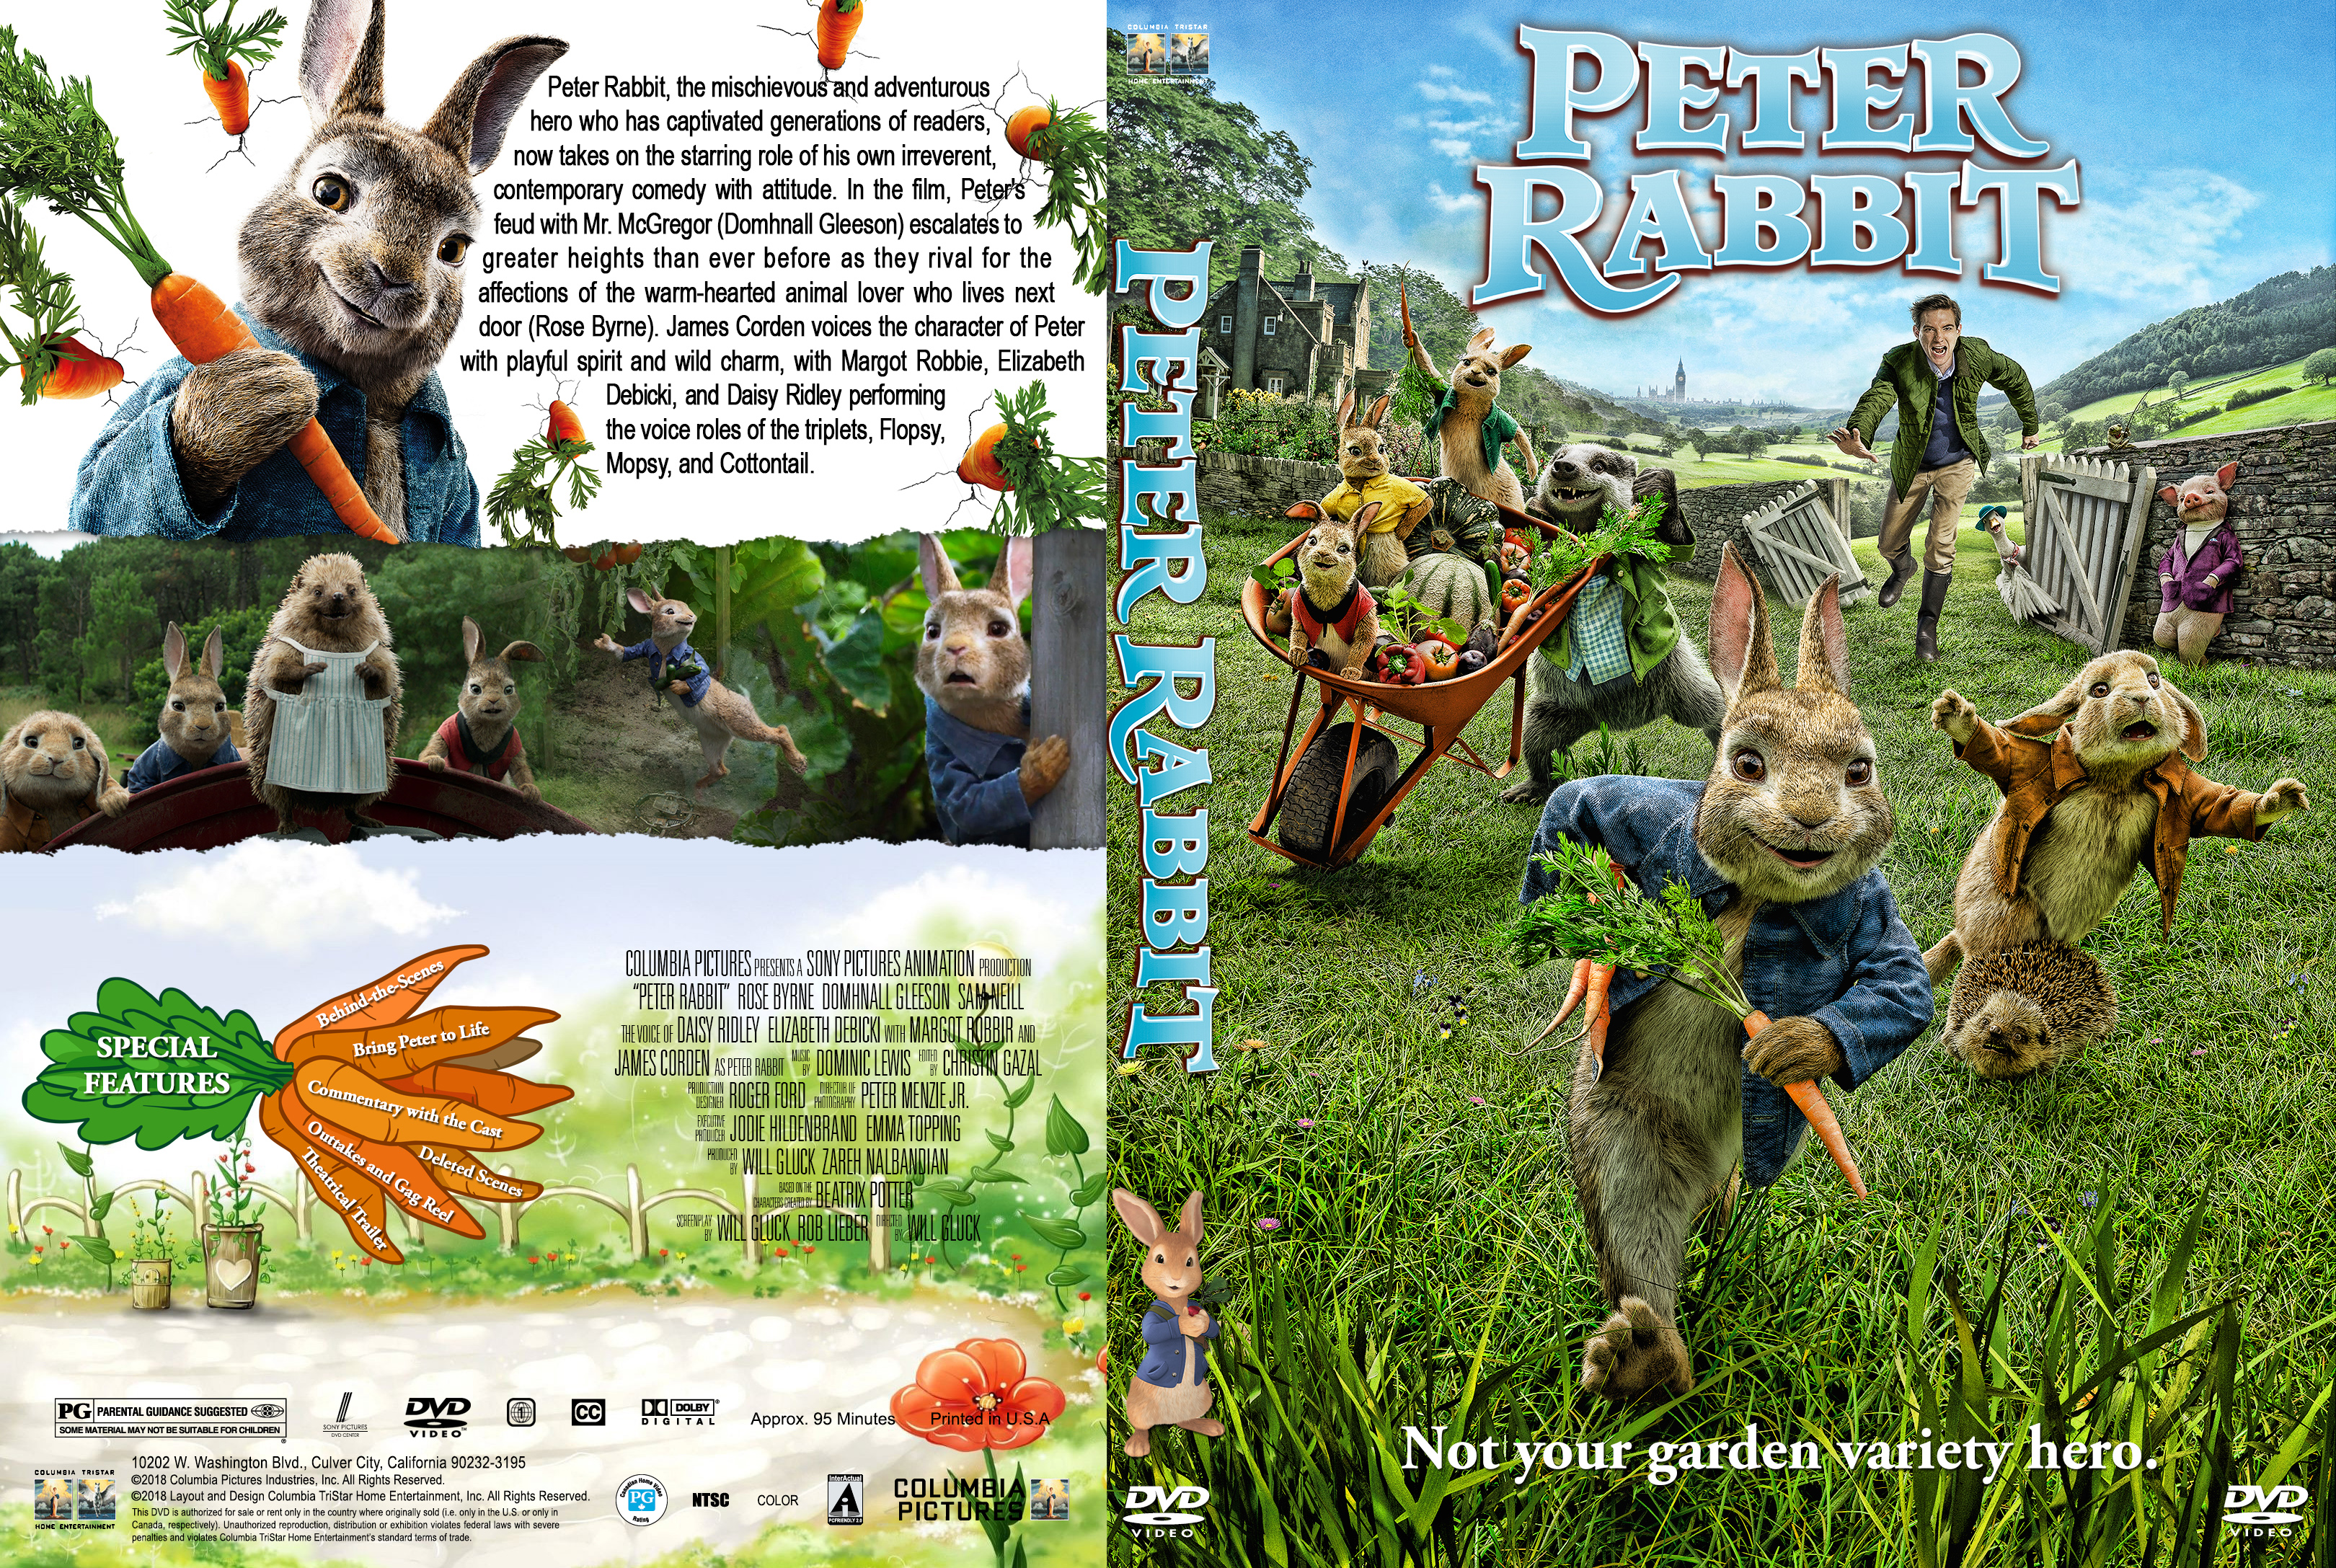 SONY PICTURES HOME ENT PETER RABBIT (DVD) D51321D